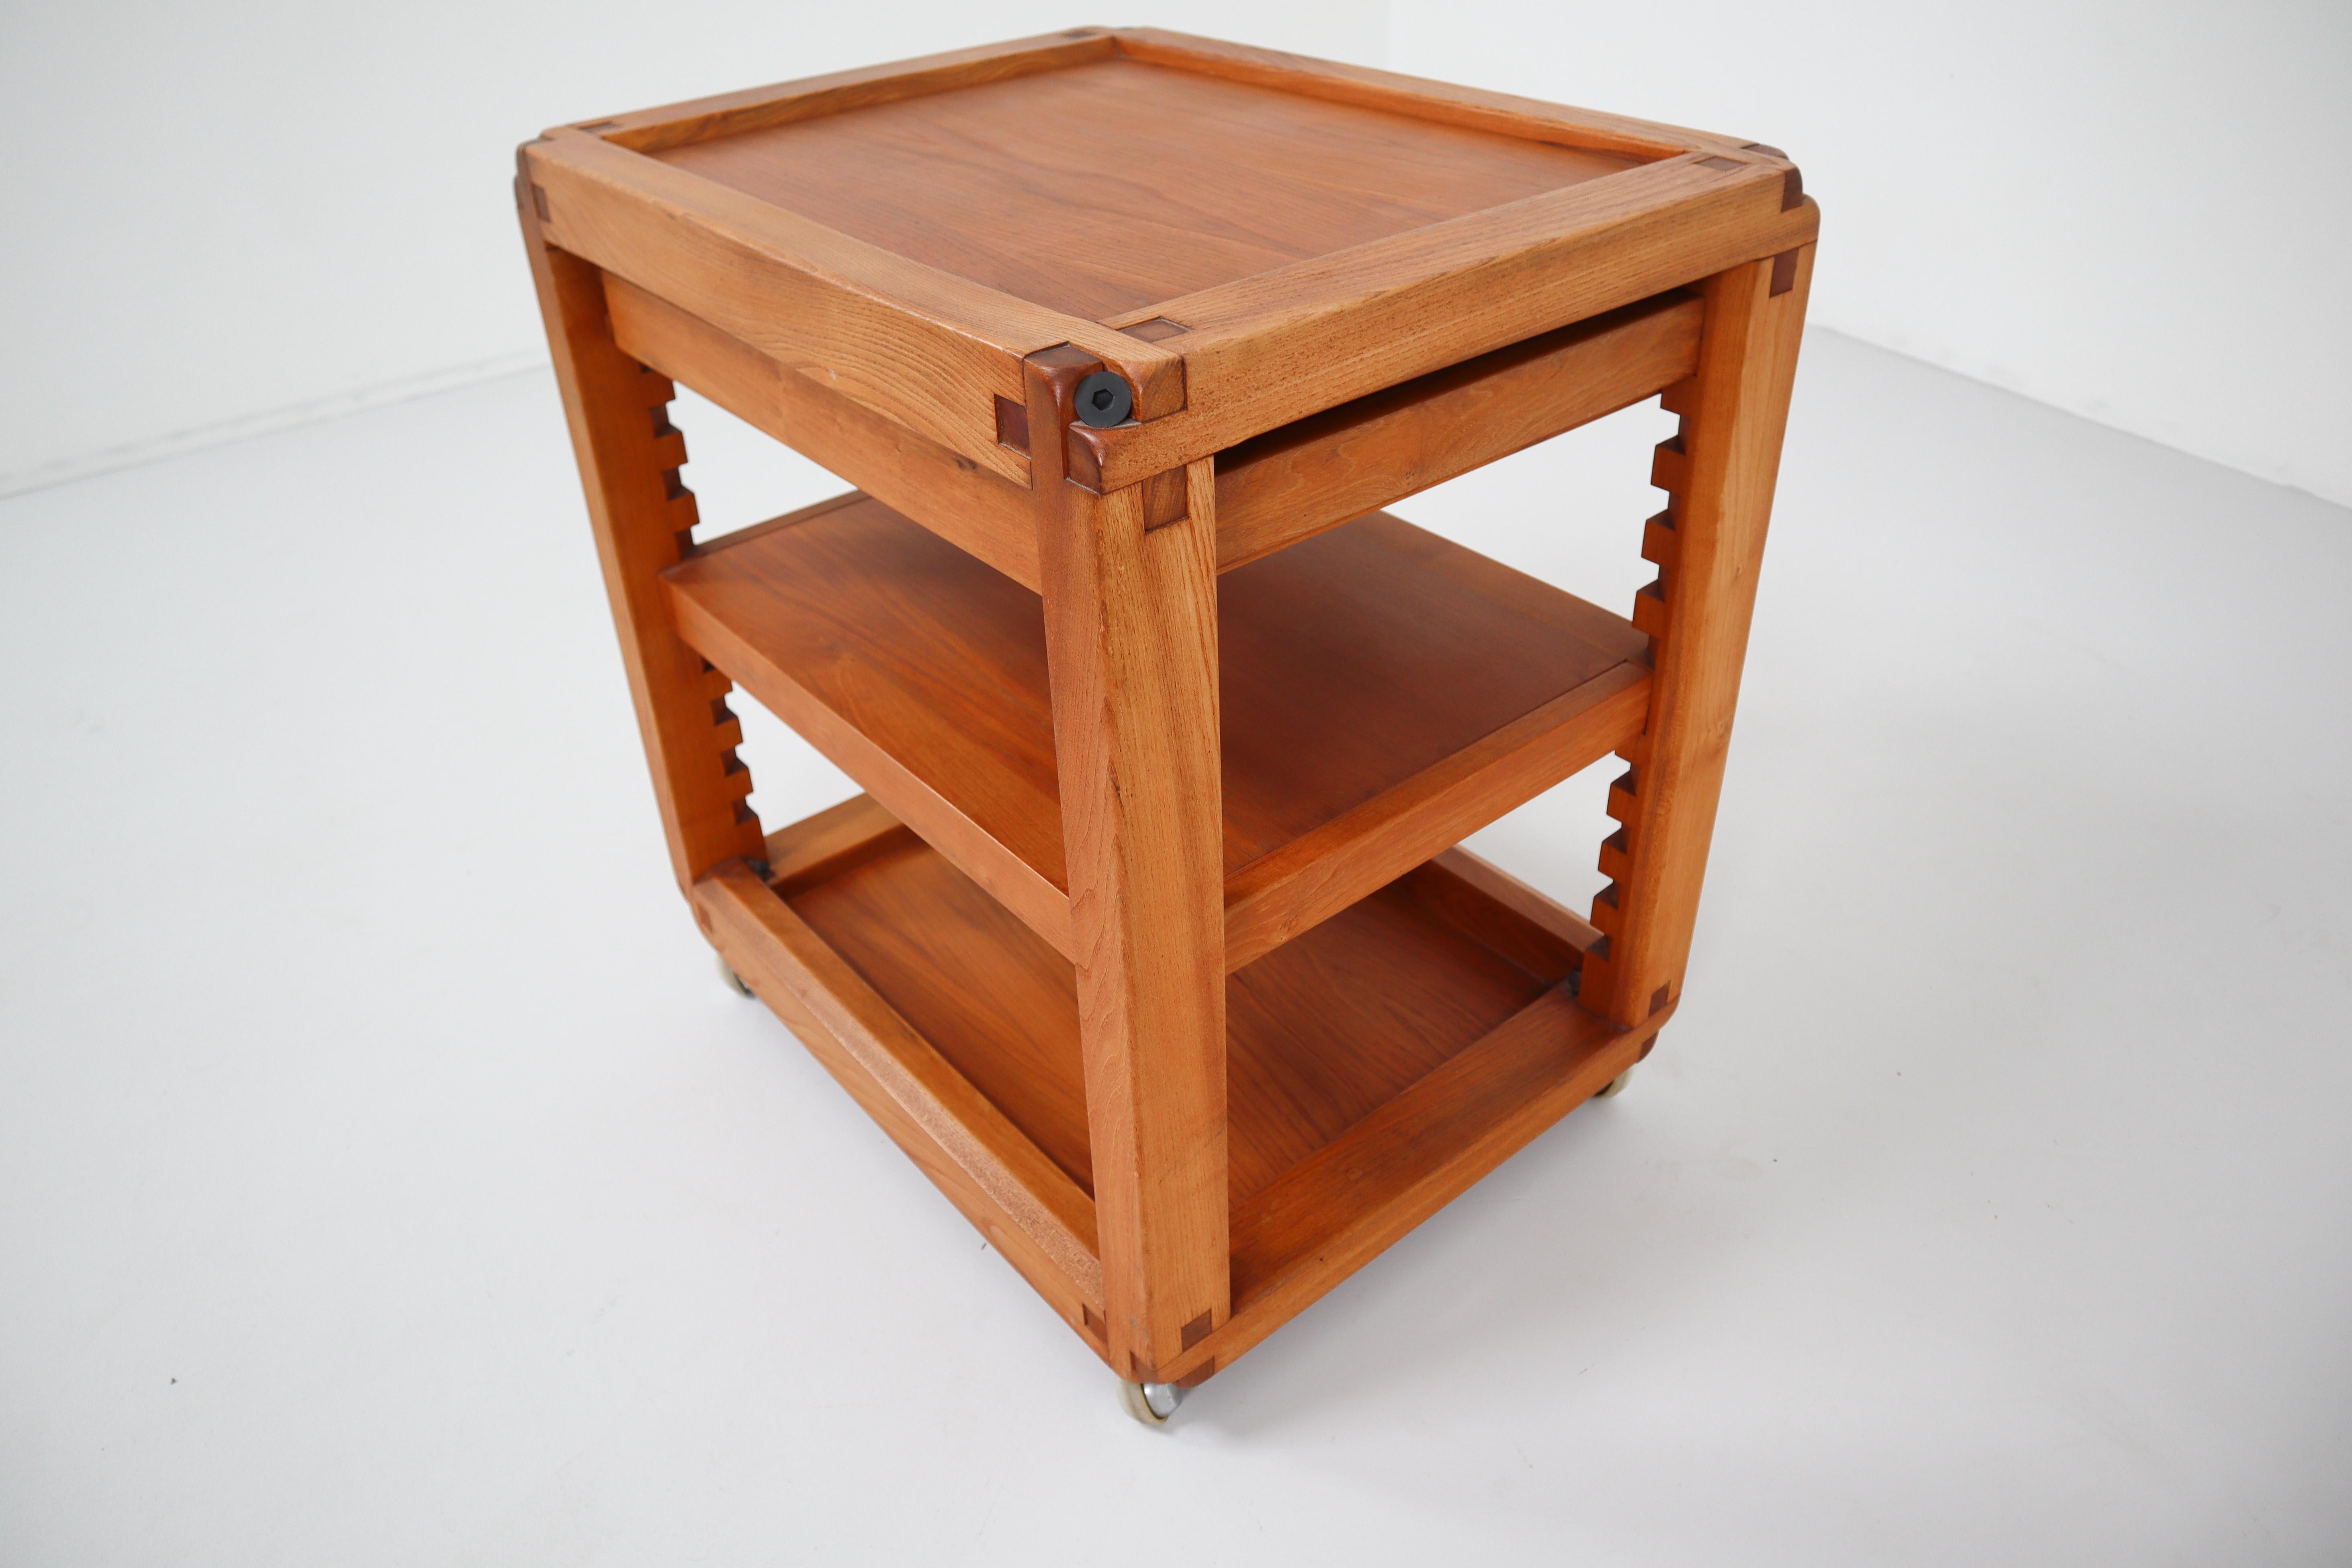 Side table -bar in elmwood designed by Pierre Chapo 1970s.

This side table -bar is designed by the master woodworker Pierre Chapo produced during the 70s. As of all of his designs, this table-bar has a very modest and simplistic design. All